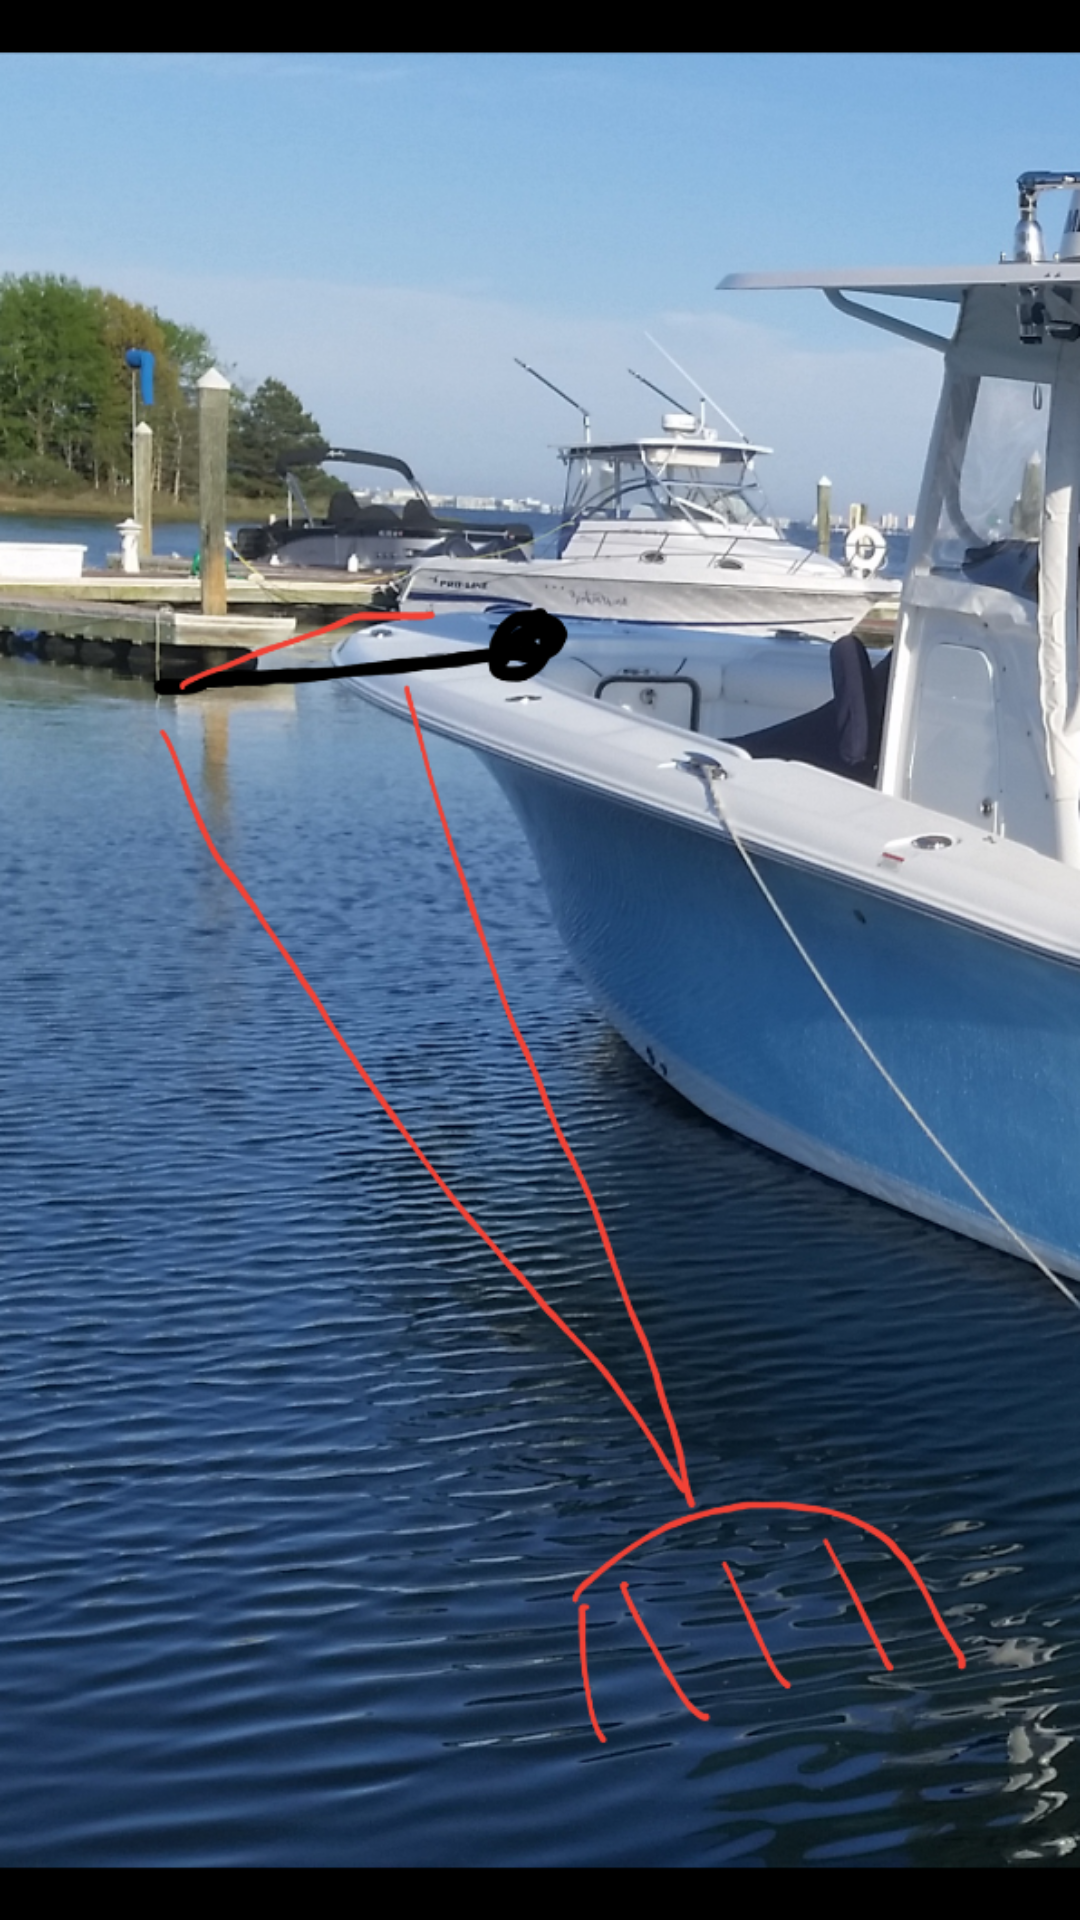 Advice Needed - Offshore fishing with downrigger - The Hull Truth